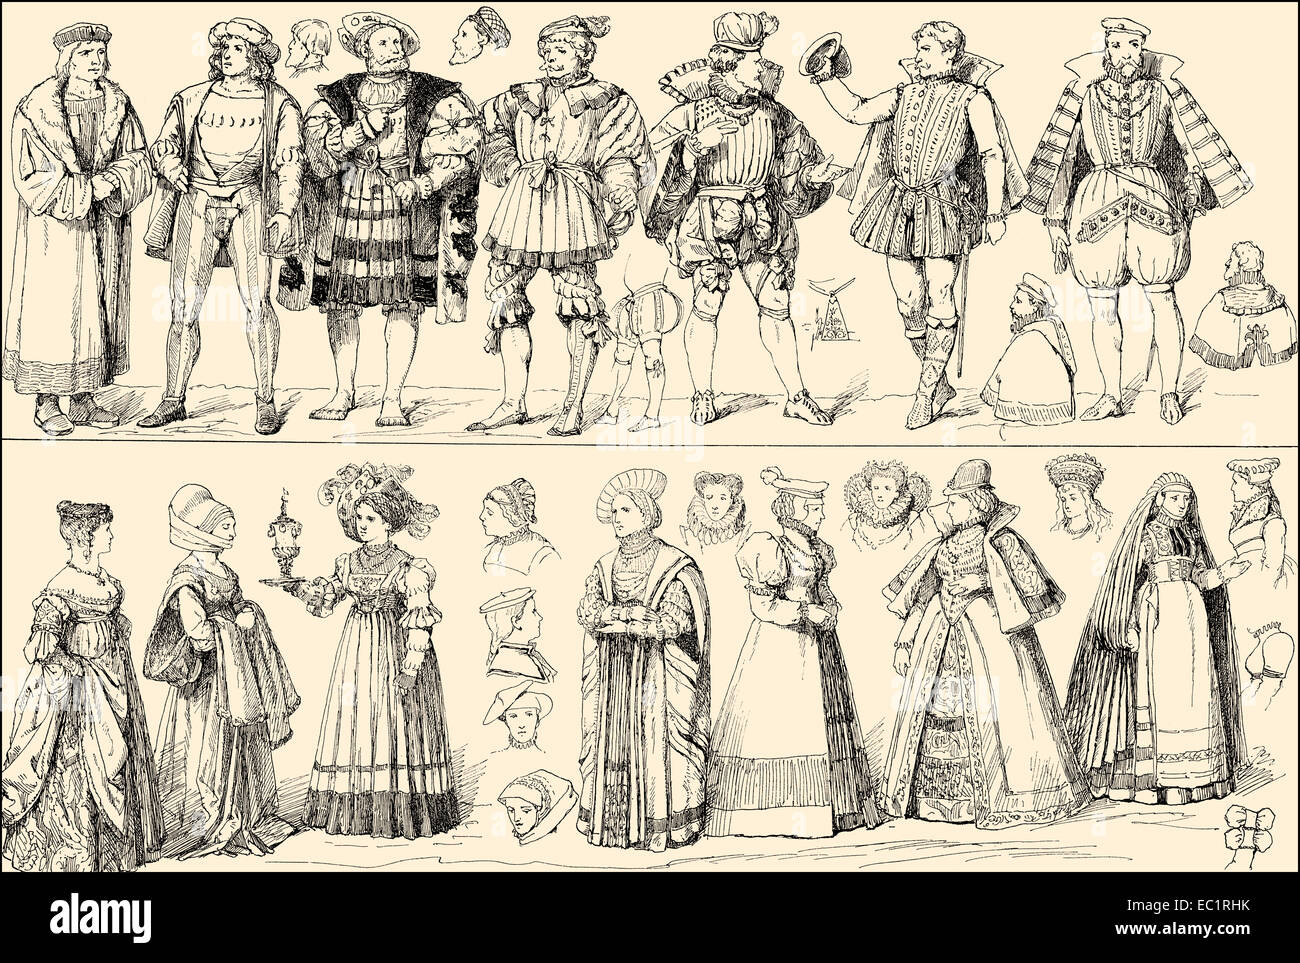 costumes of the 16th century, Germany Stock Photo